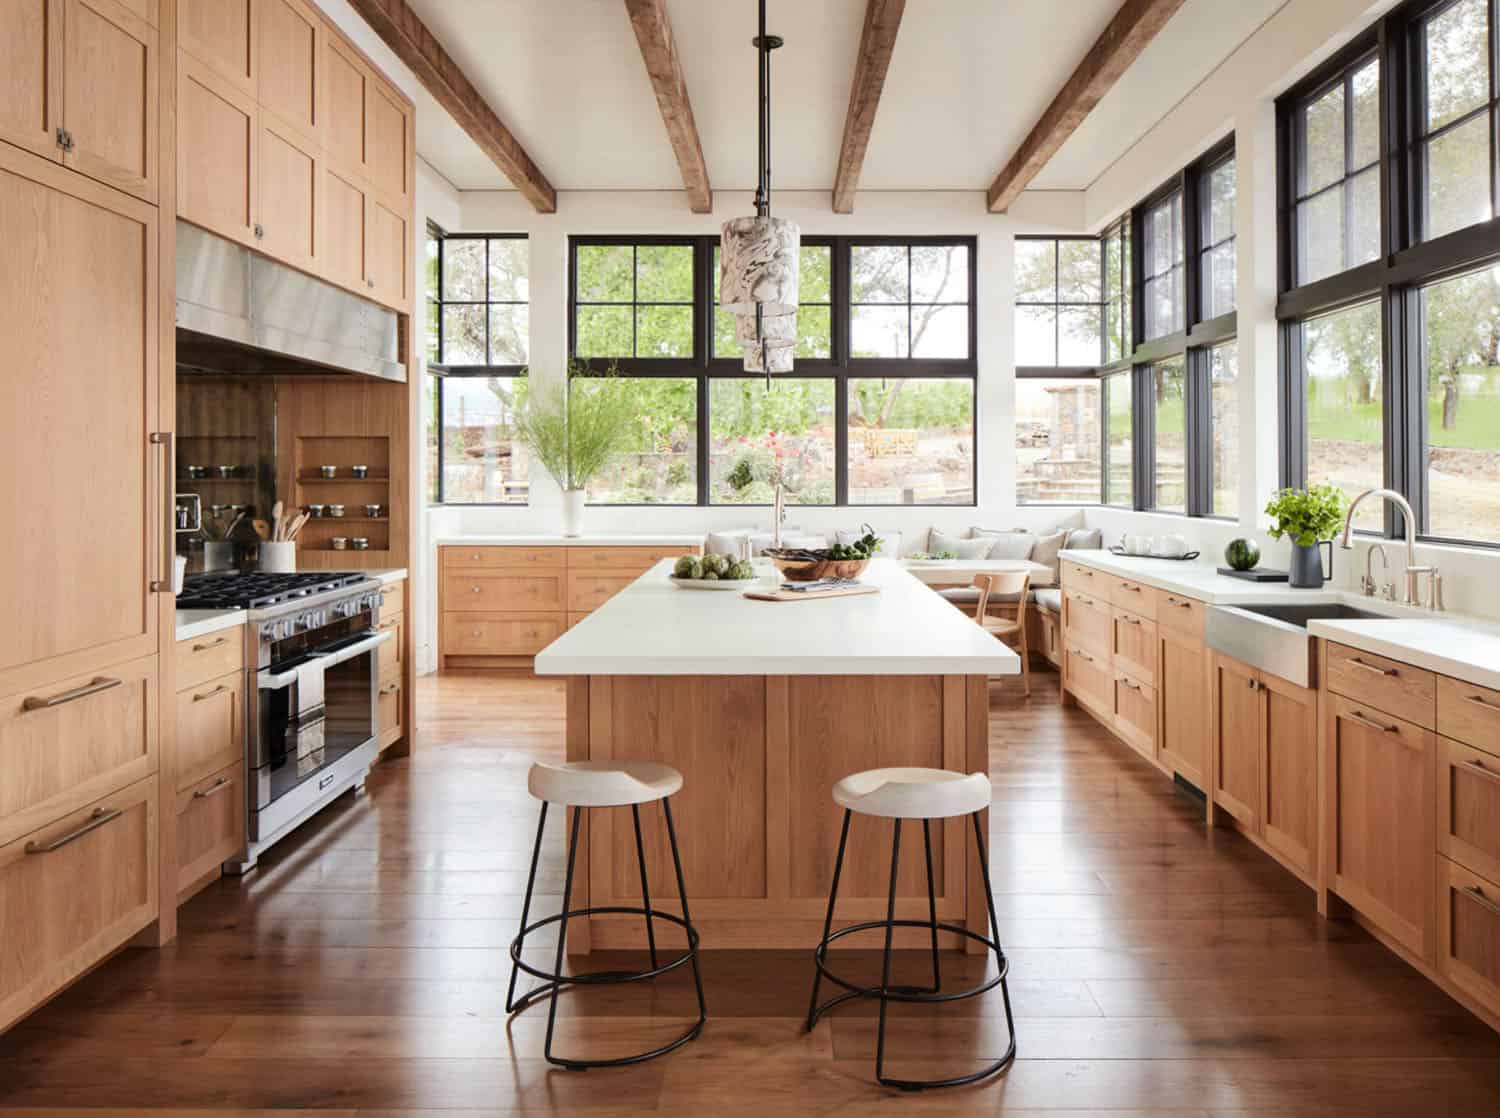 25 Jaw Dropping Ideas For A Beautiful Rustic Farmhouse Kitchen